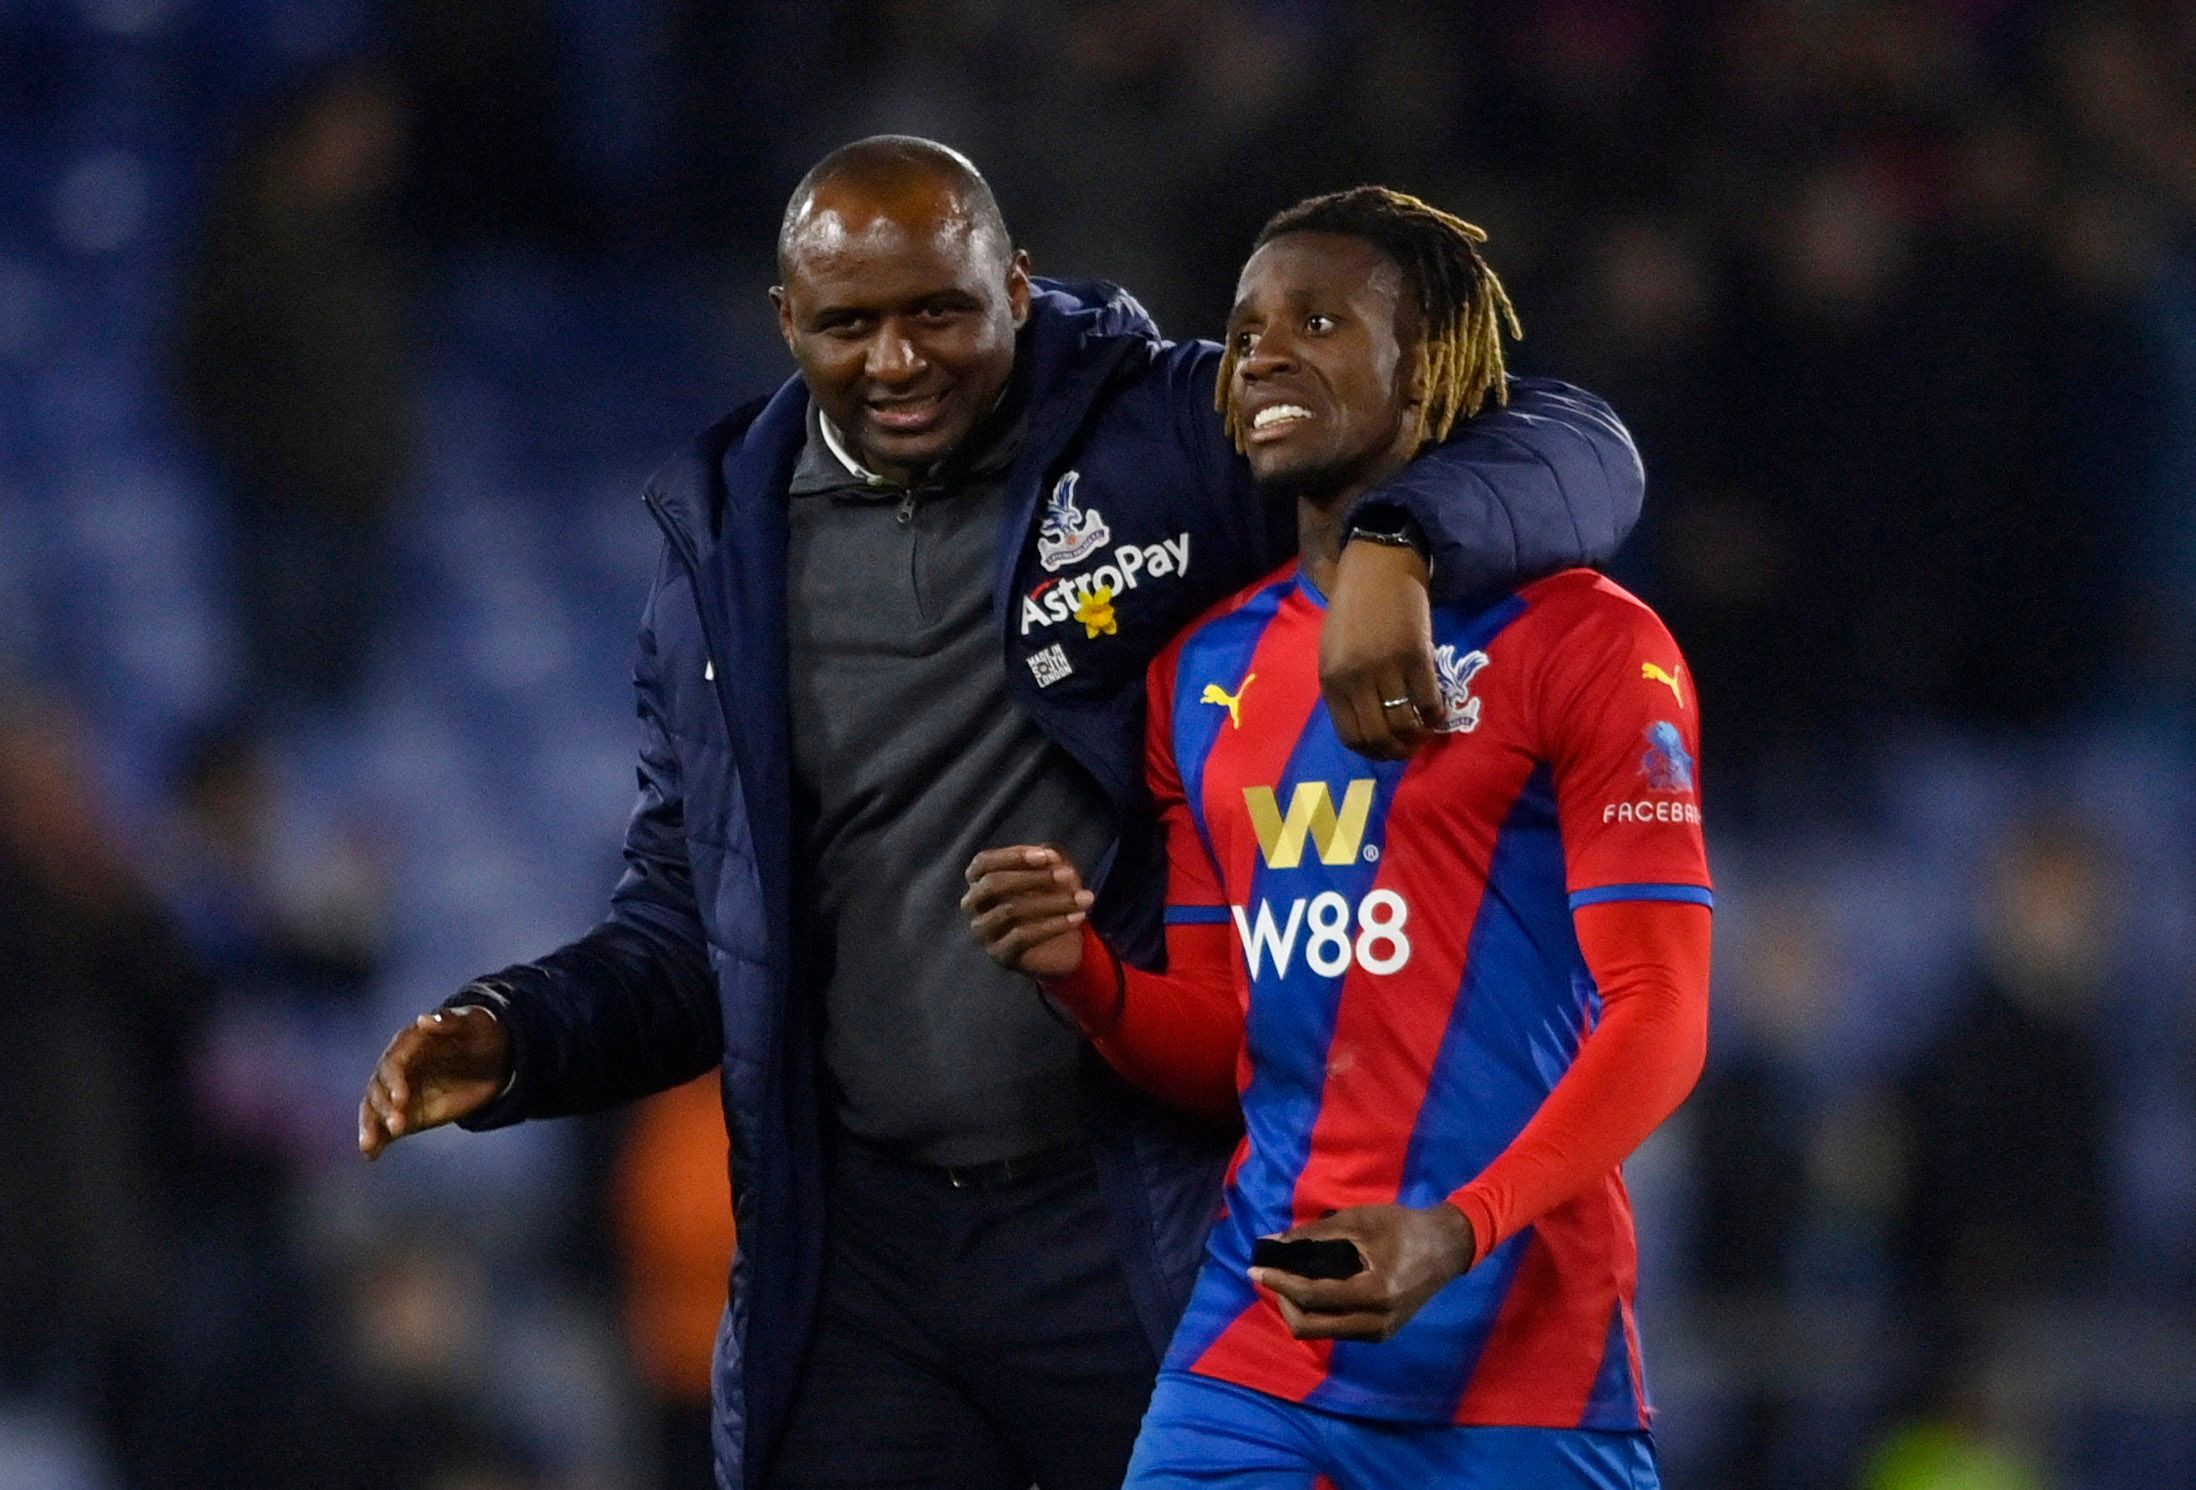 Crystal Palace manager Patrick Vieira and Wilfried Zaha after the matchSoccer Football - Premier League - Crystal Palace v Leeds United - Selhurst Park, London, Britain - April 25, 2022  Crystal Palace manager Patrick Vieira and Wilfried Zaha after the match REUTERS/Tony Obrien EDITORIAL USE ONLY. No use with unauthorized audio, video, data, fixture lists, club/league logos or 'live' services. Online in-match use limited to 75 images, no video emulation. No use in betting, games or single club /